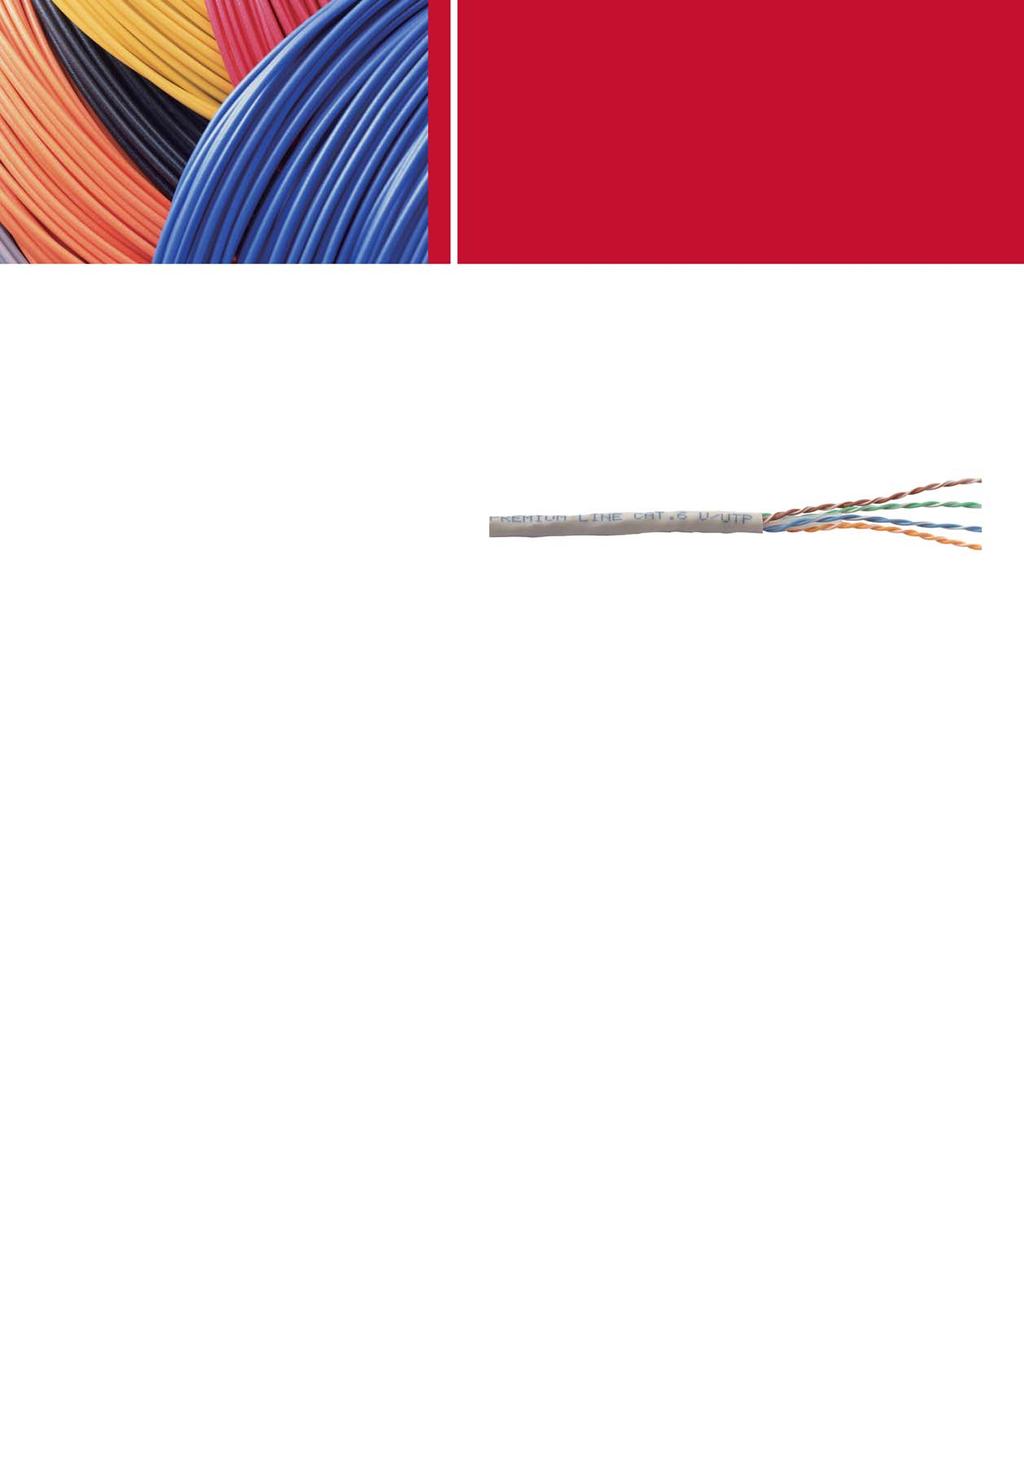 CATEGORY 6 CABLING SOLUTIONS Installation Cable Category 6 U/UTP 250MHz Standards: ANSI/TIA-568-C.2 ISO/IEC 11801 ED.